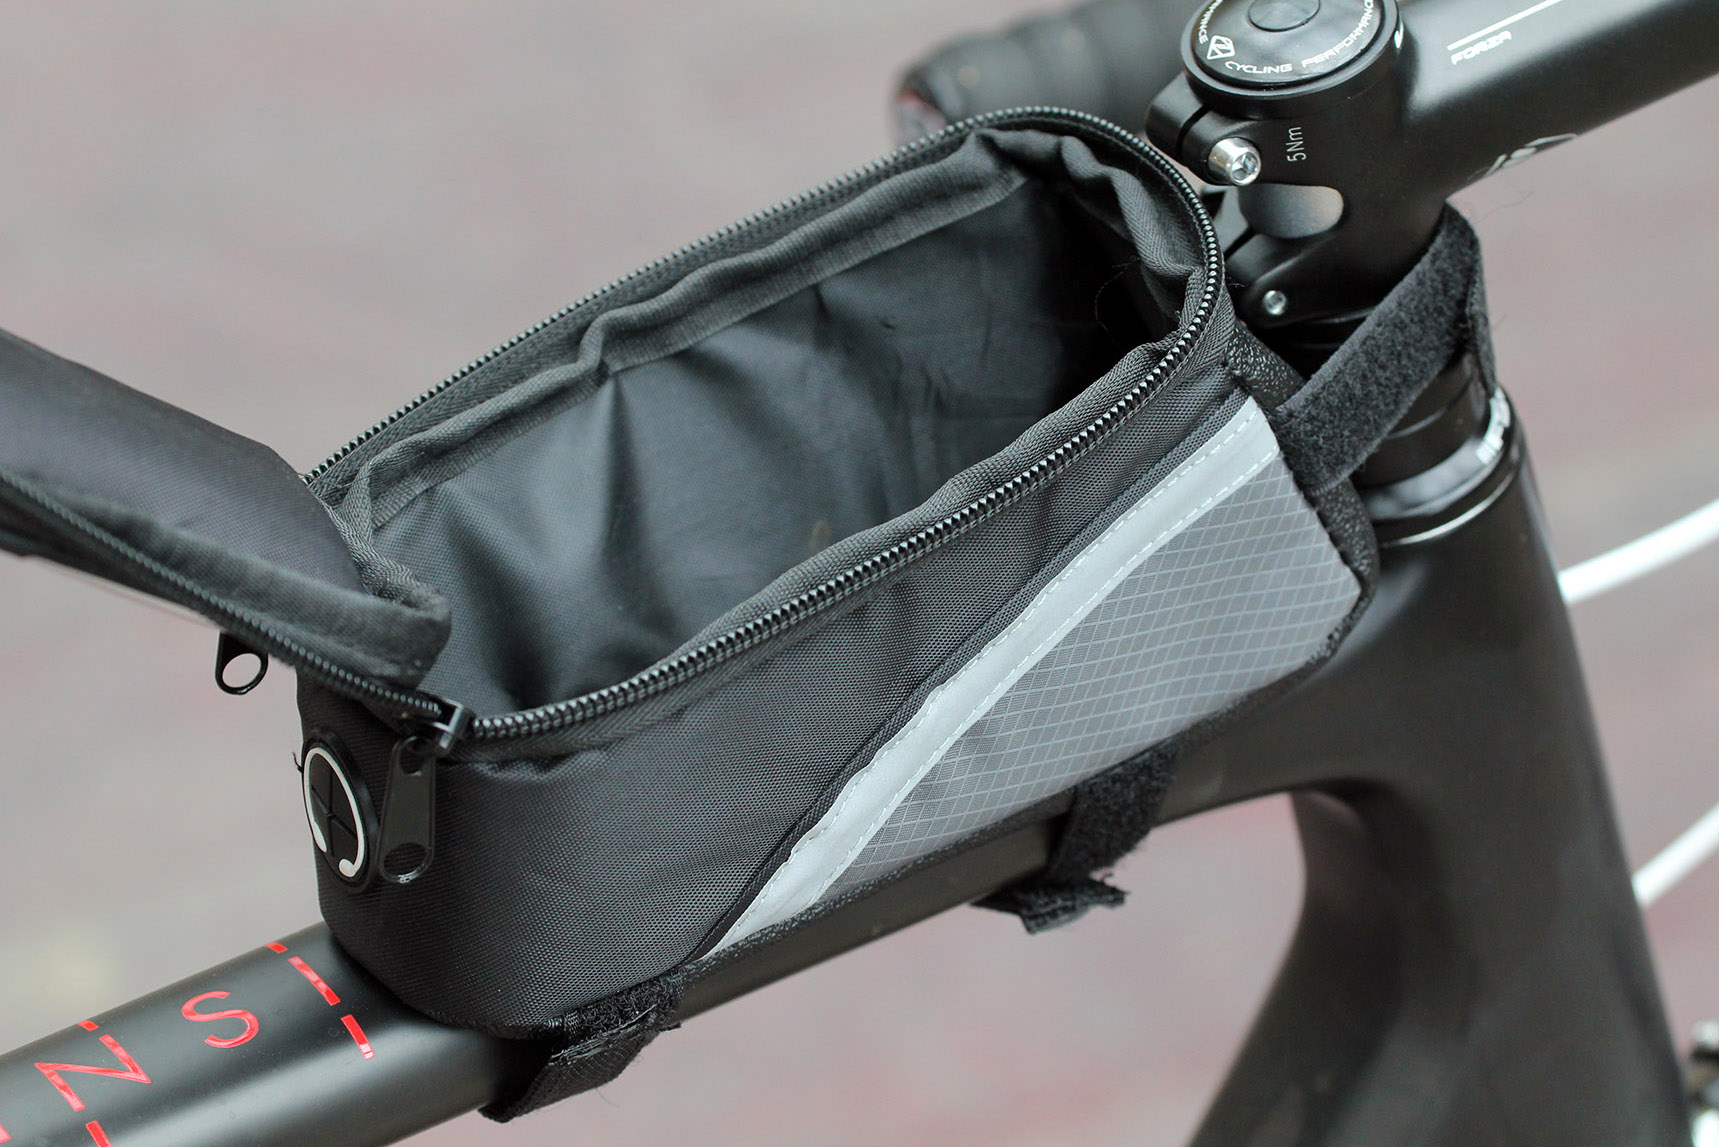 Details about   Cycling Bike Bicycle Frame Pannier Front Tube Pouch Bag Waterproof Phone Holder 